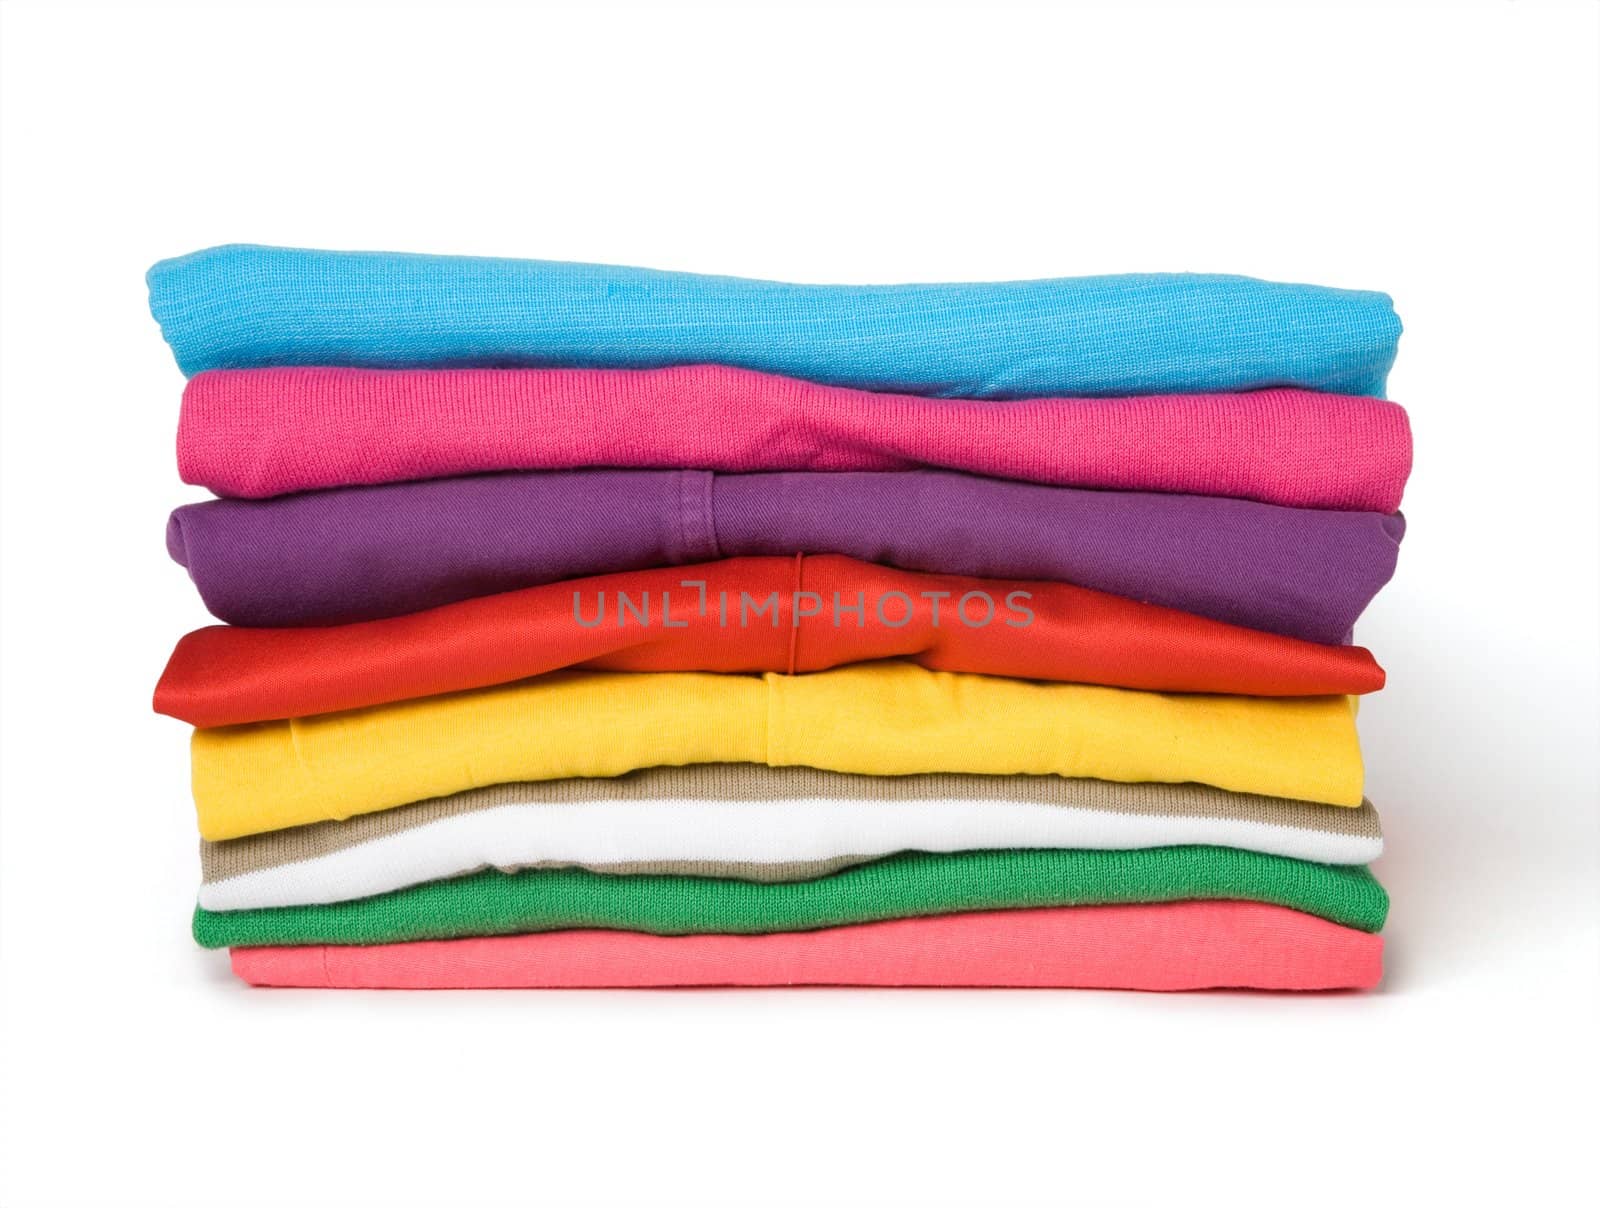 Pile of multi-coloured clothes by Gravicapa